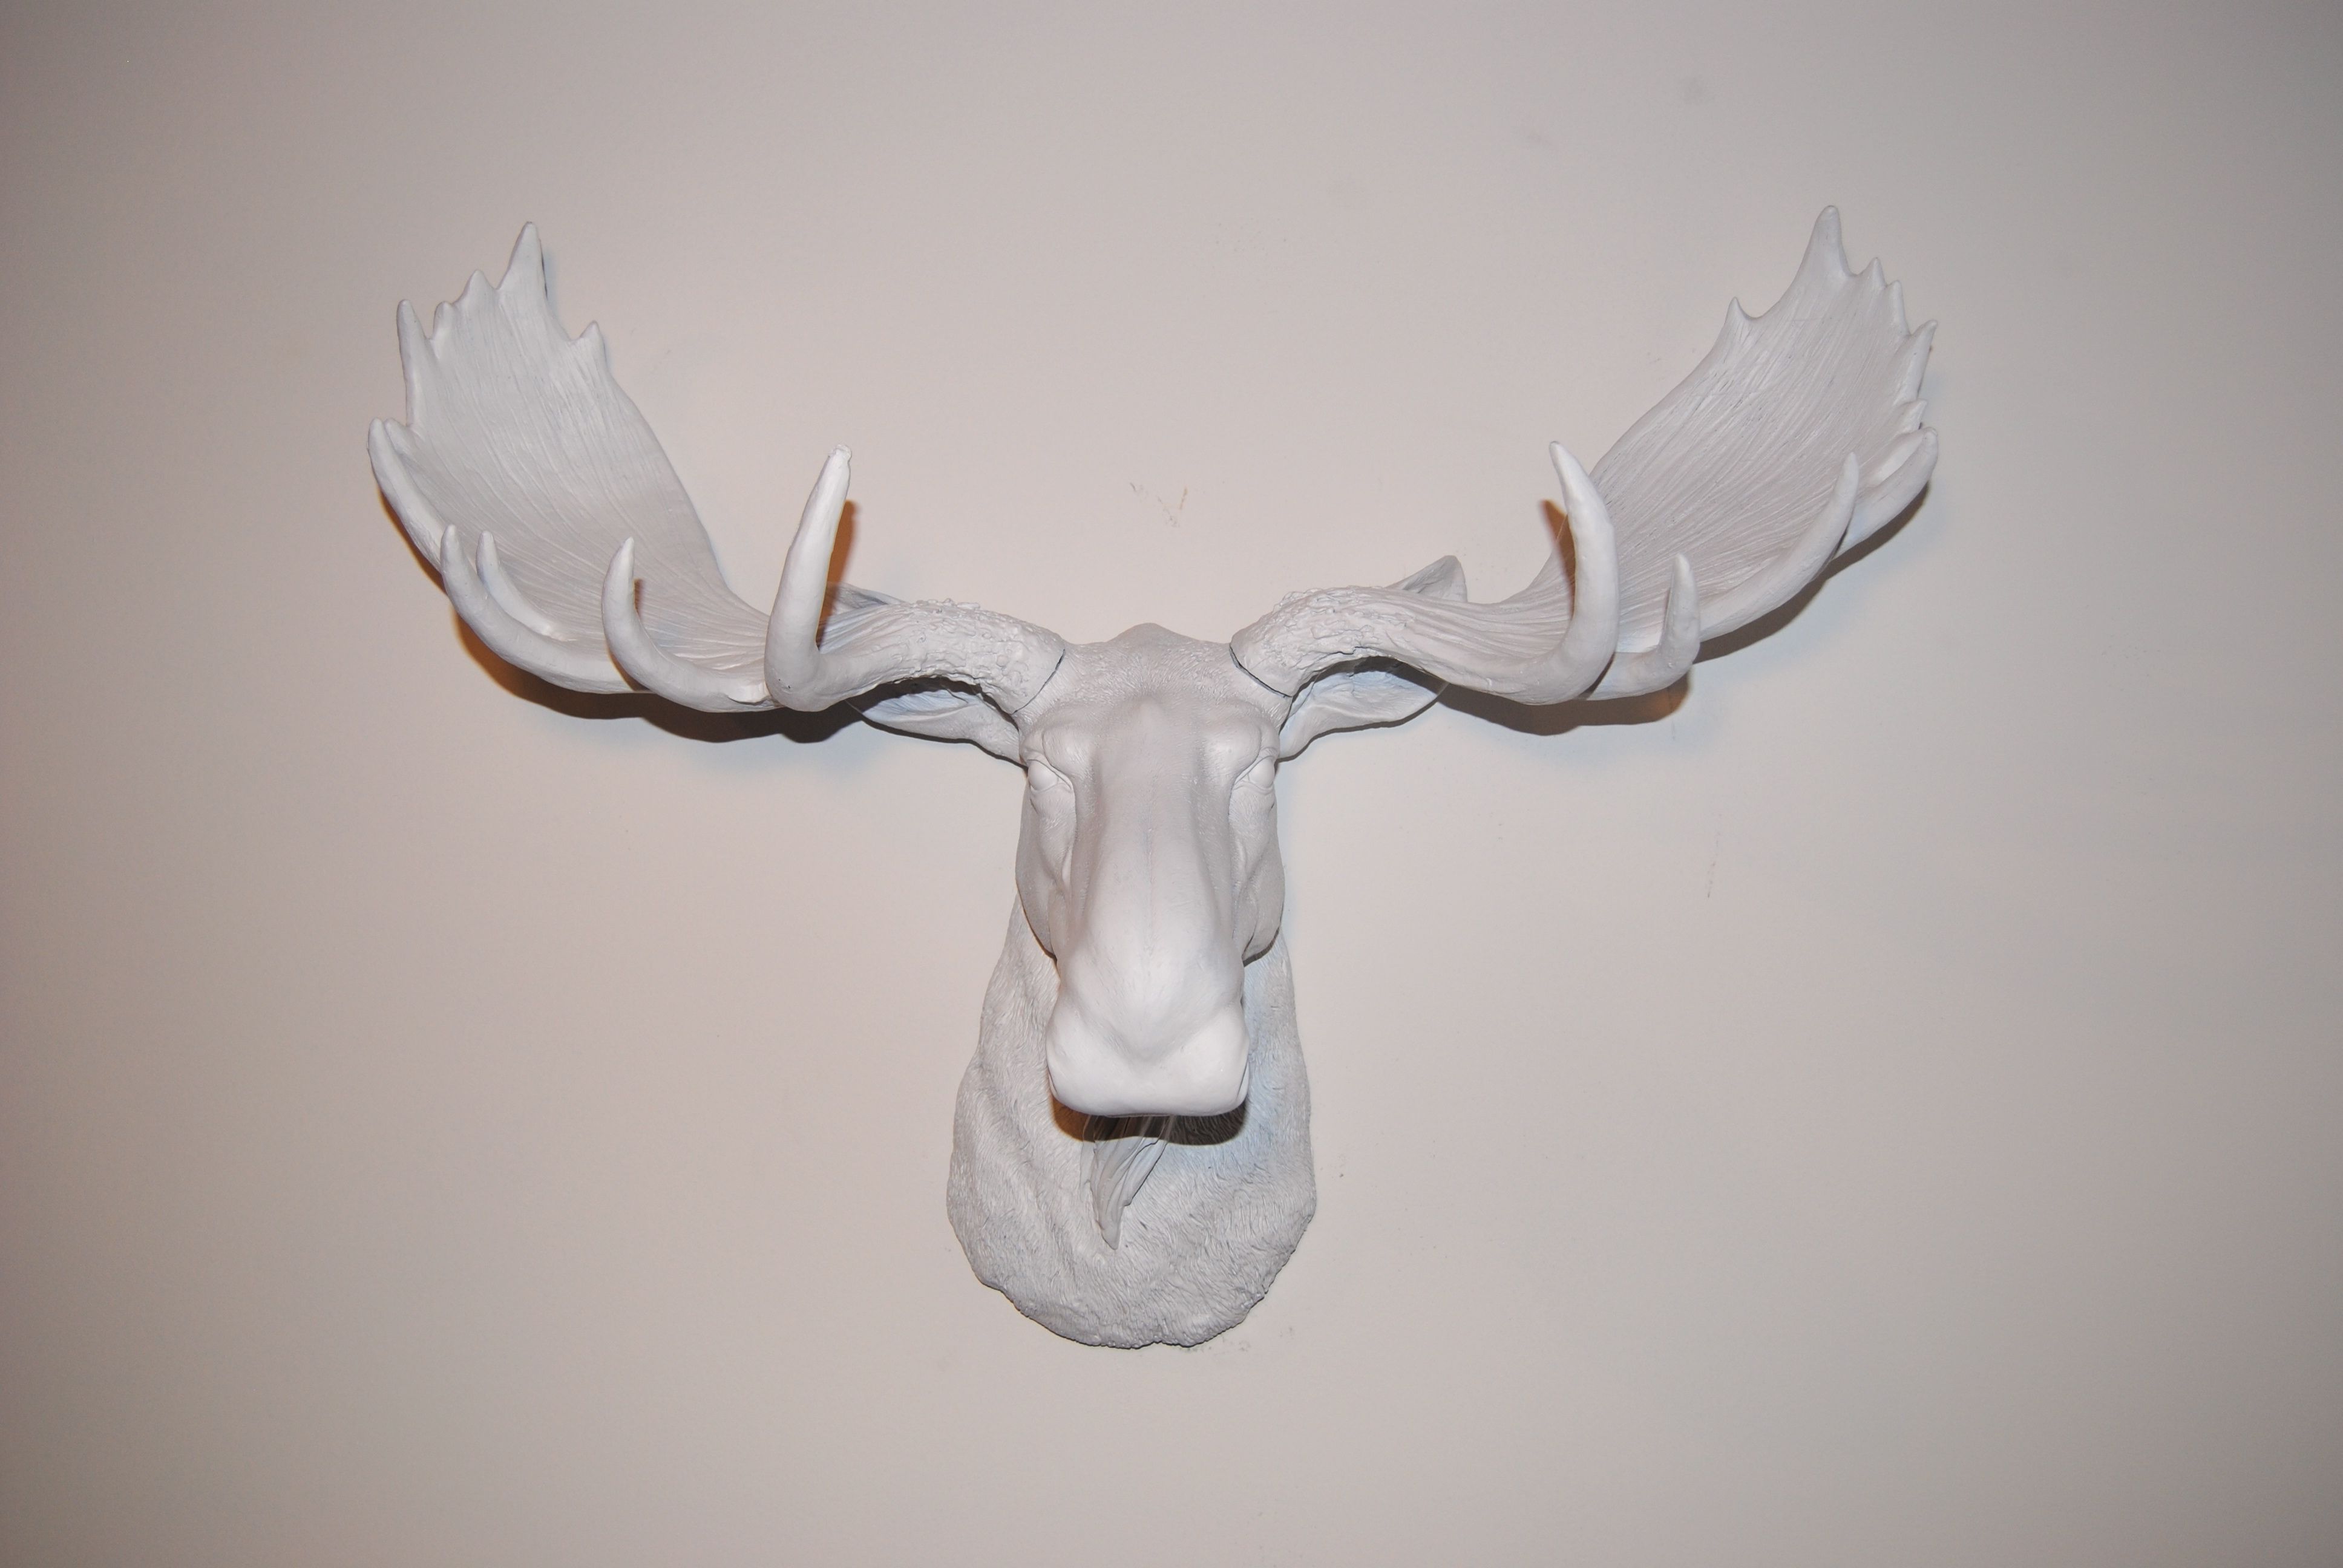 Well Known Atlantis Faux Taxidermy Wall Decor In White Moose Head – White Antlers – Faux Taxidermy Moose, $ (View 18 of 20)